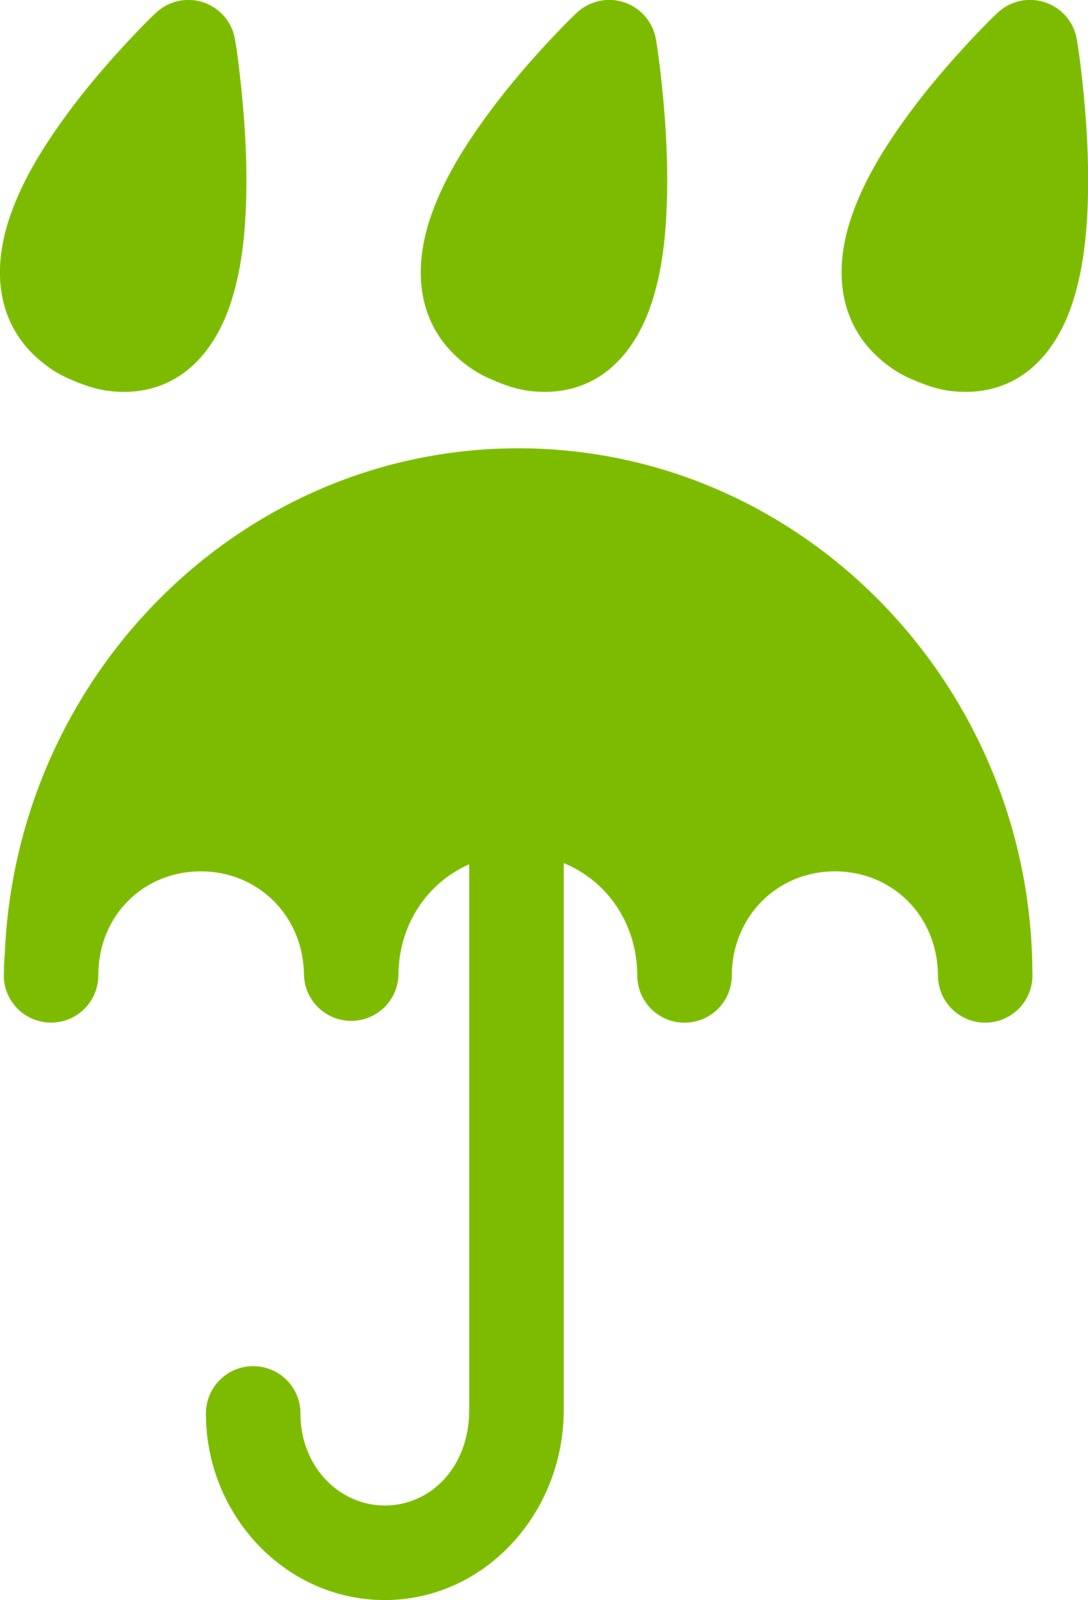 Rain protection icon from Business Bicolor Set by ahasoft